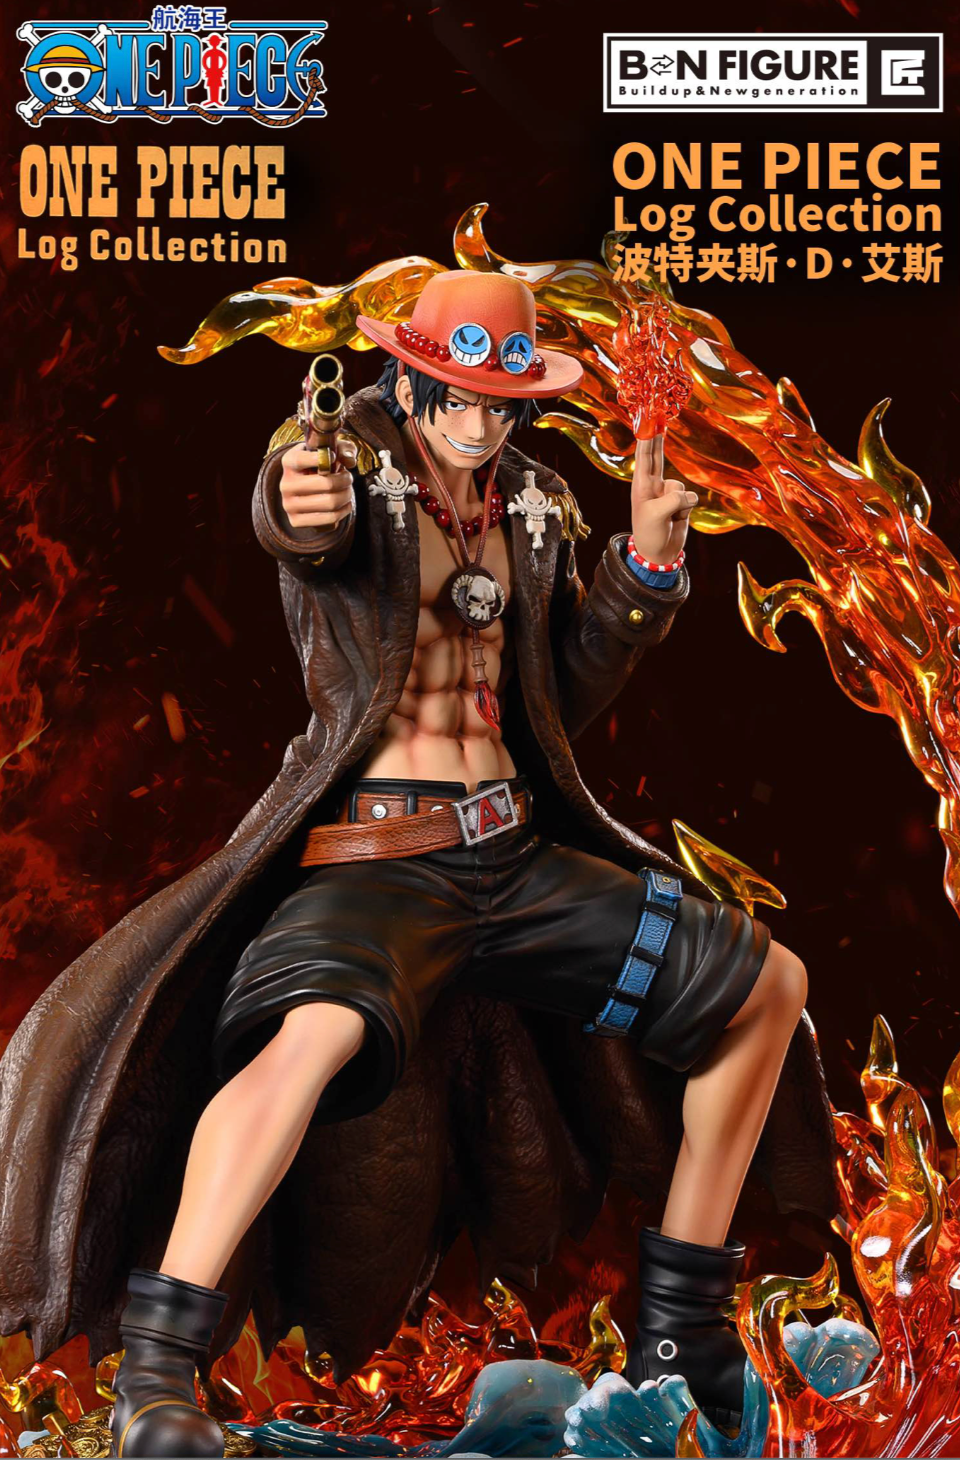 ONE PIECE Log Collection - One Piece Portgas D Ace (Licensed) [PRE